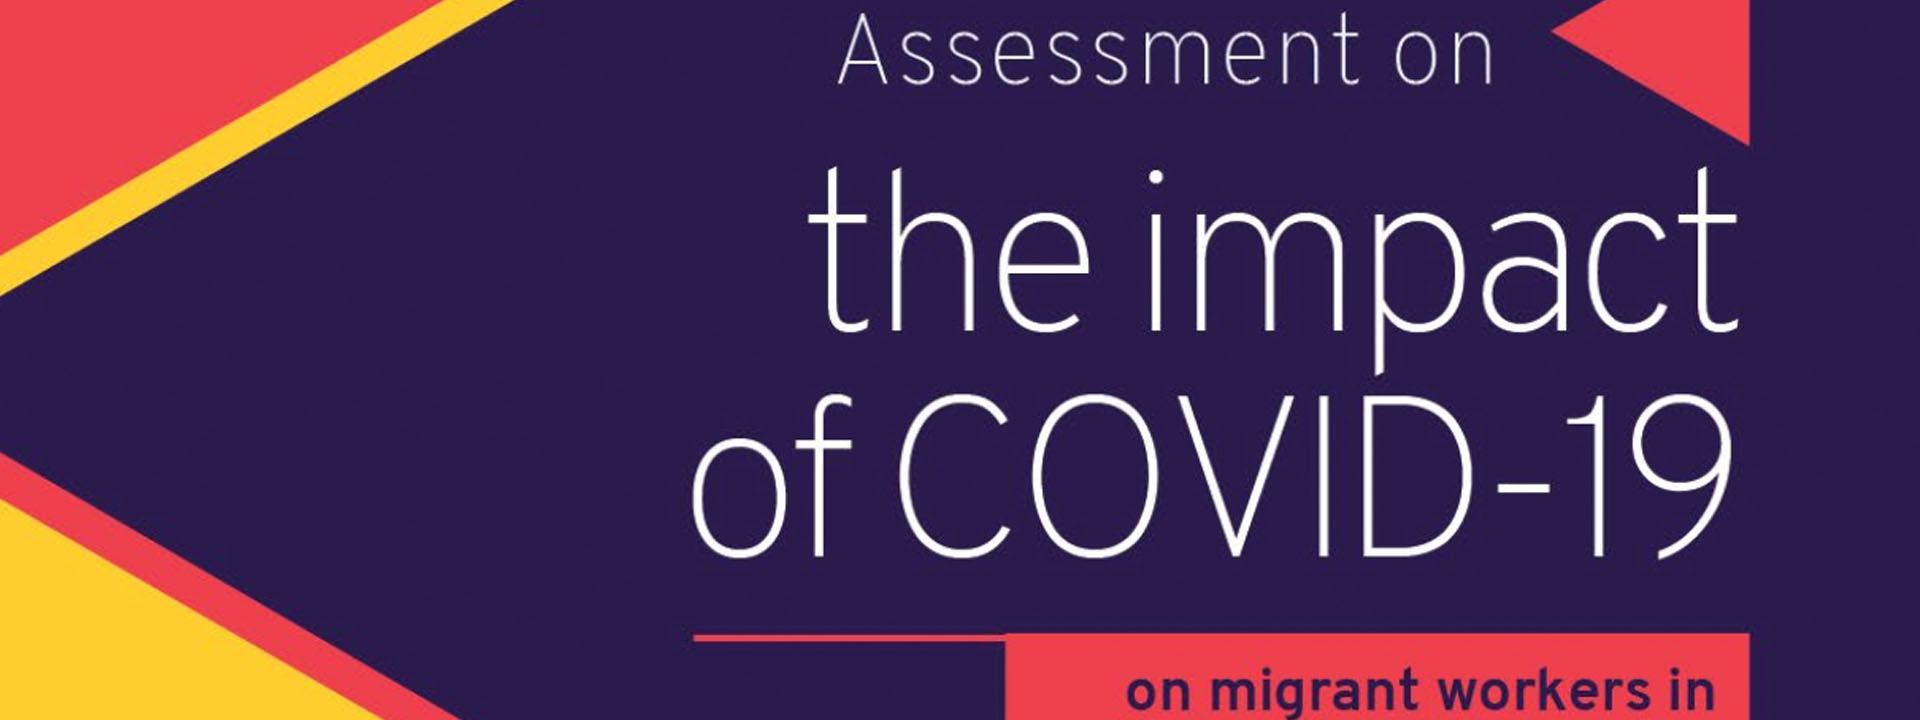 Assessment on the Impact of Covid-19 on Migrant Workers in and from the IGAD Region